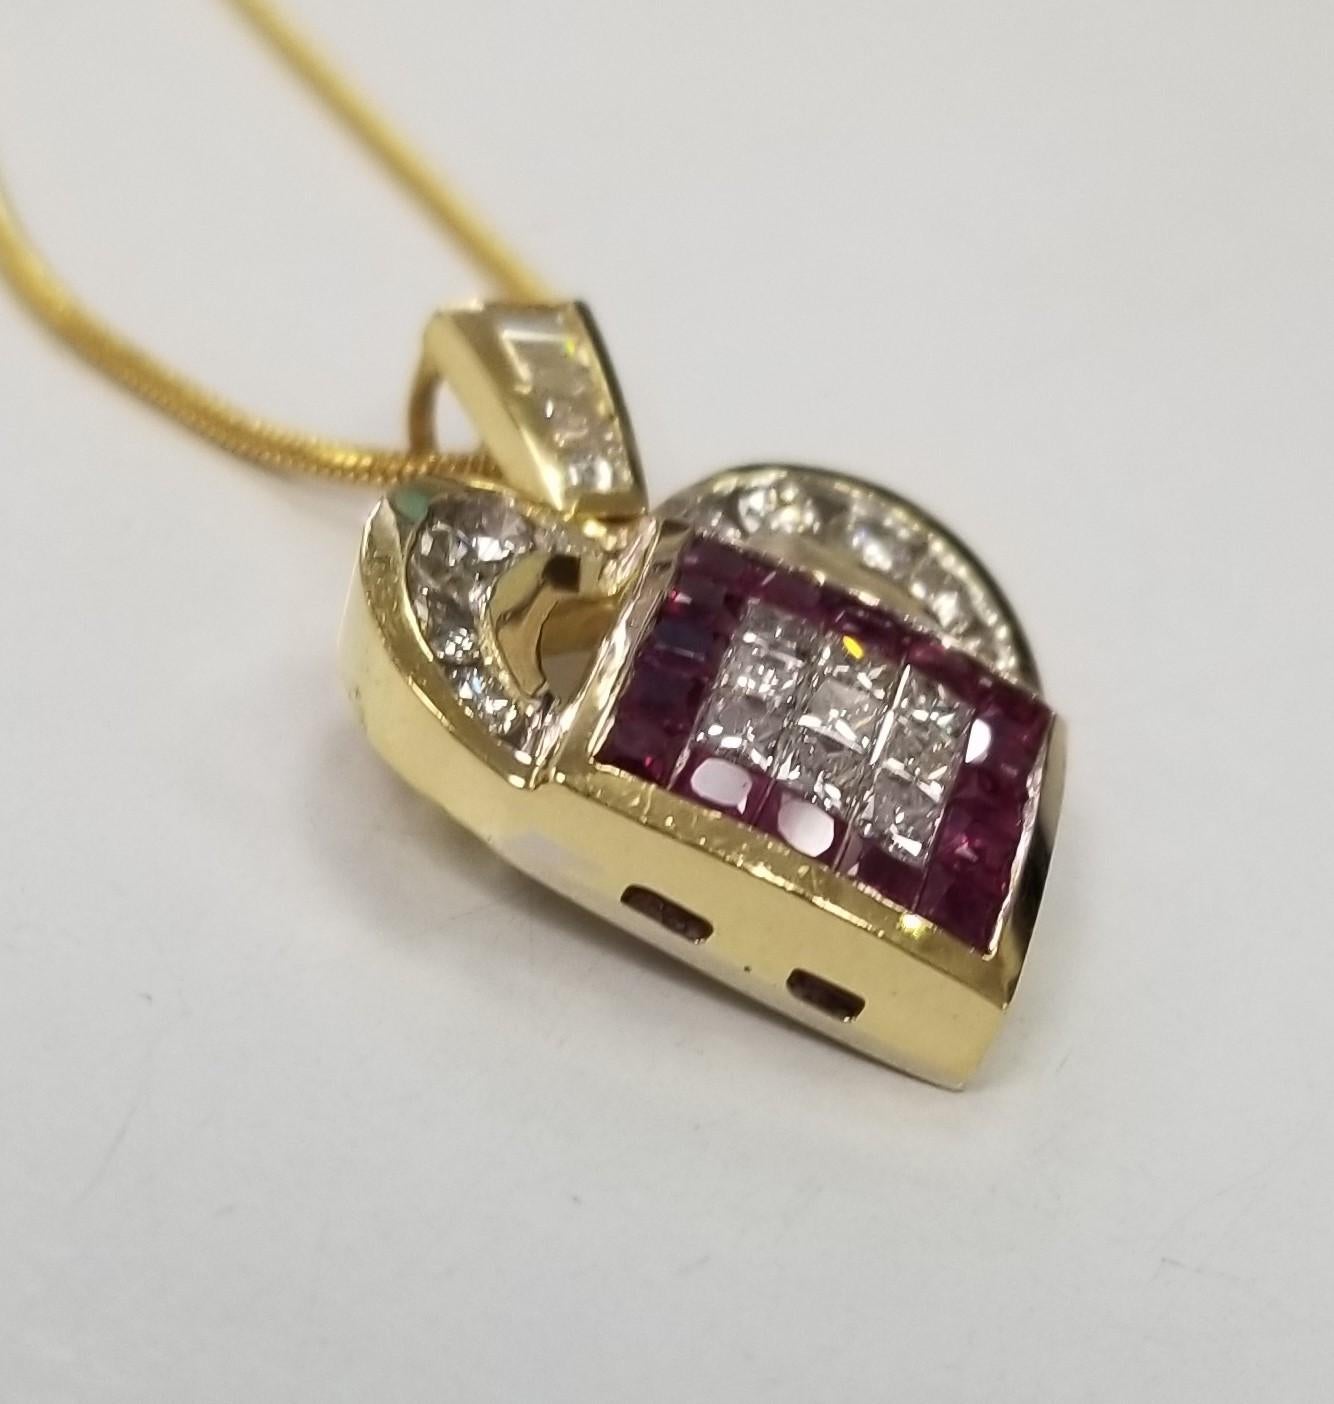 18K Yellow & White Gold Invisible set Ruby and Diamond Heart Pendant 2.00 Carat total weight, on a 14k yellow gold 16 inch snake chain.
*Motivated to Sell - Please make a Fair Offer*
Specifications:
Metal: 18K White and Yellow Gold
Colored Stones: